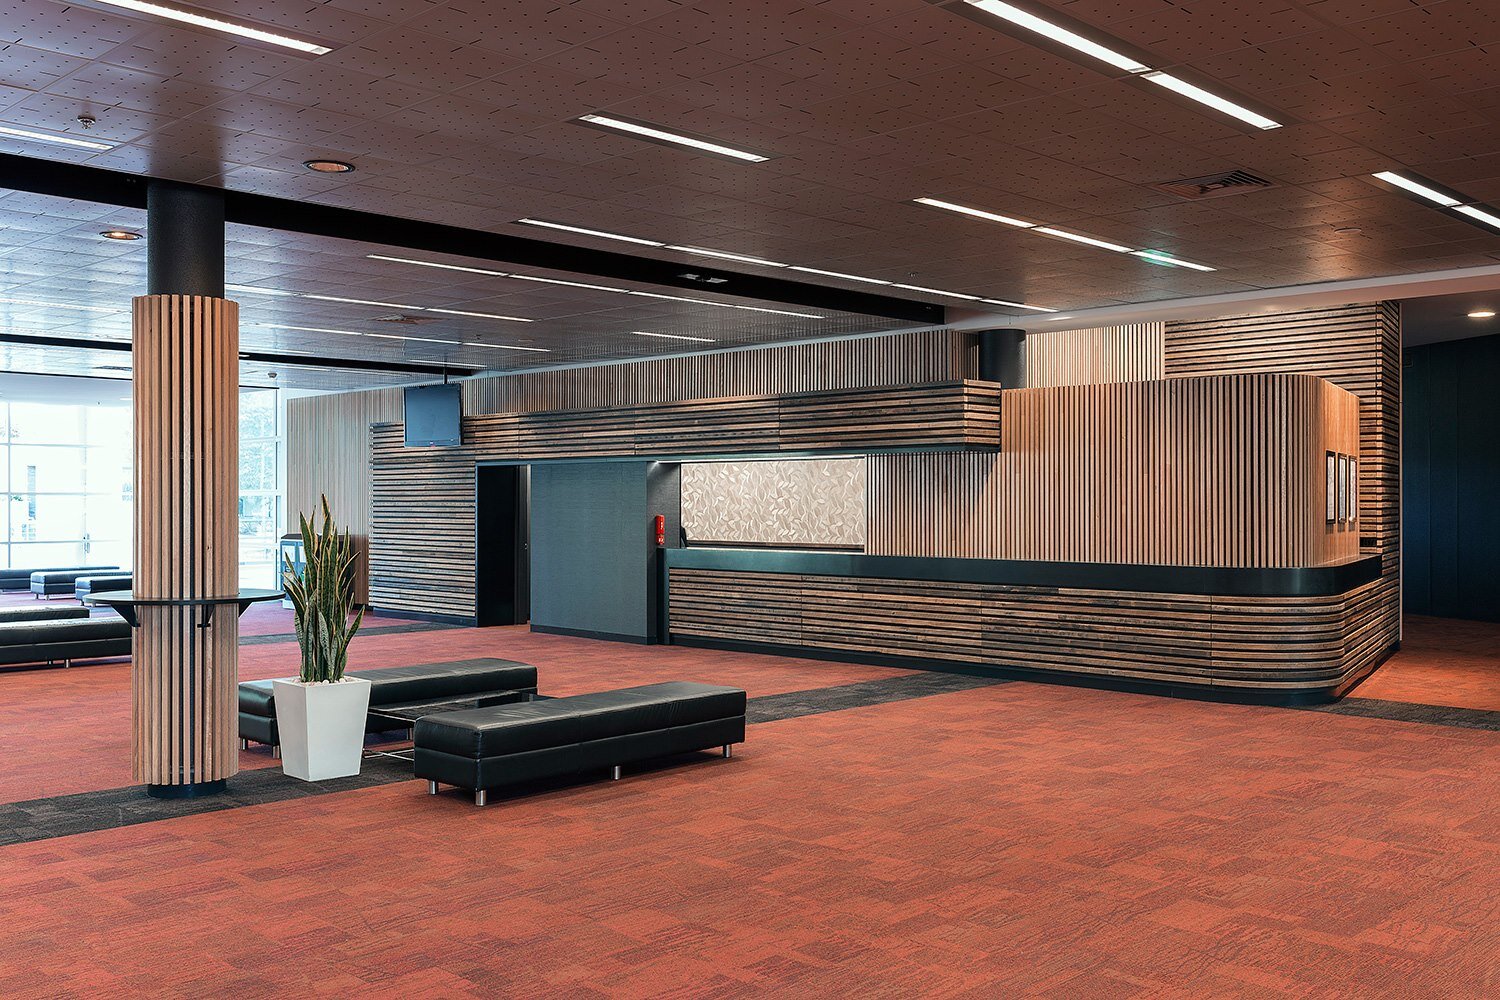 Featured timber cladding at the National Convention Centre 